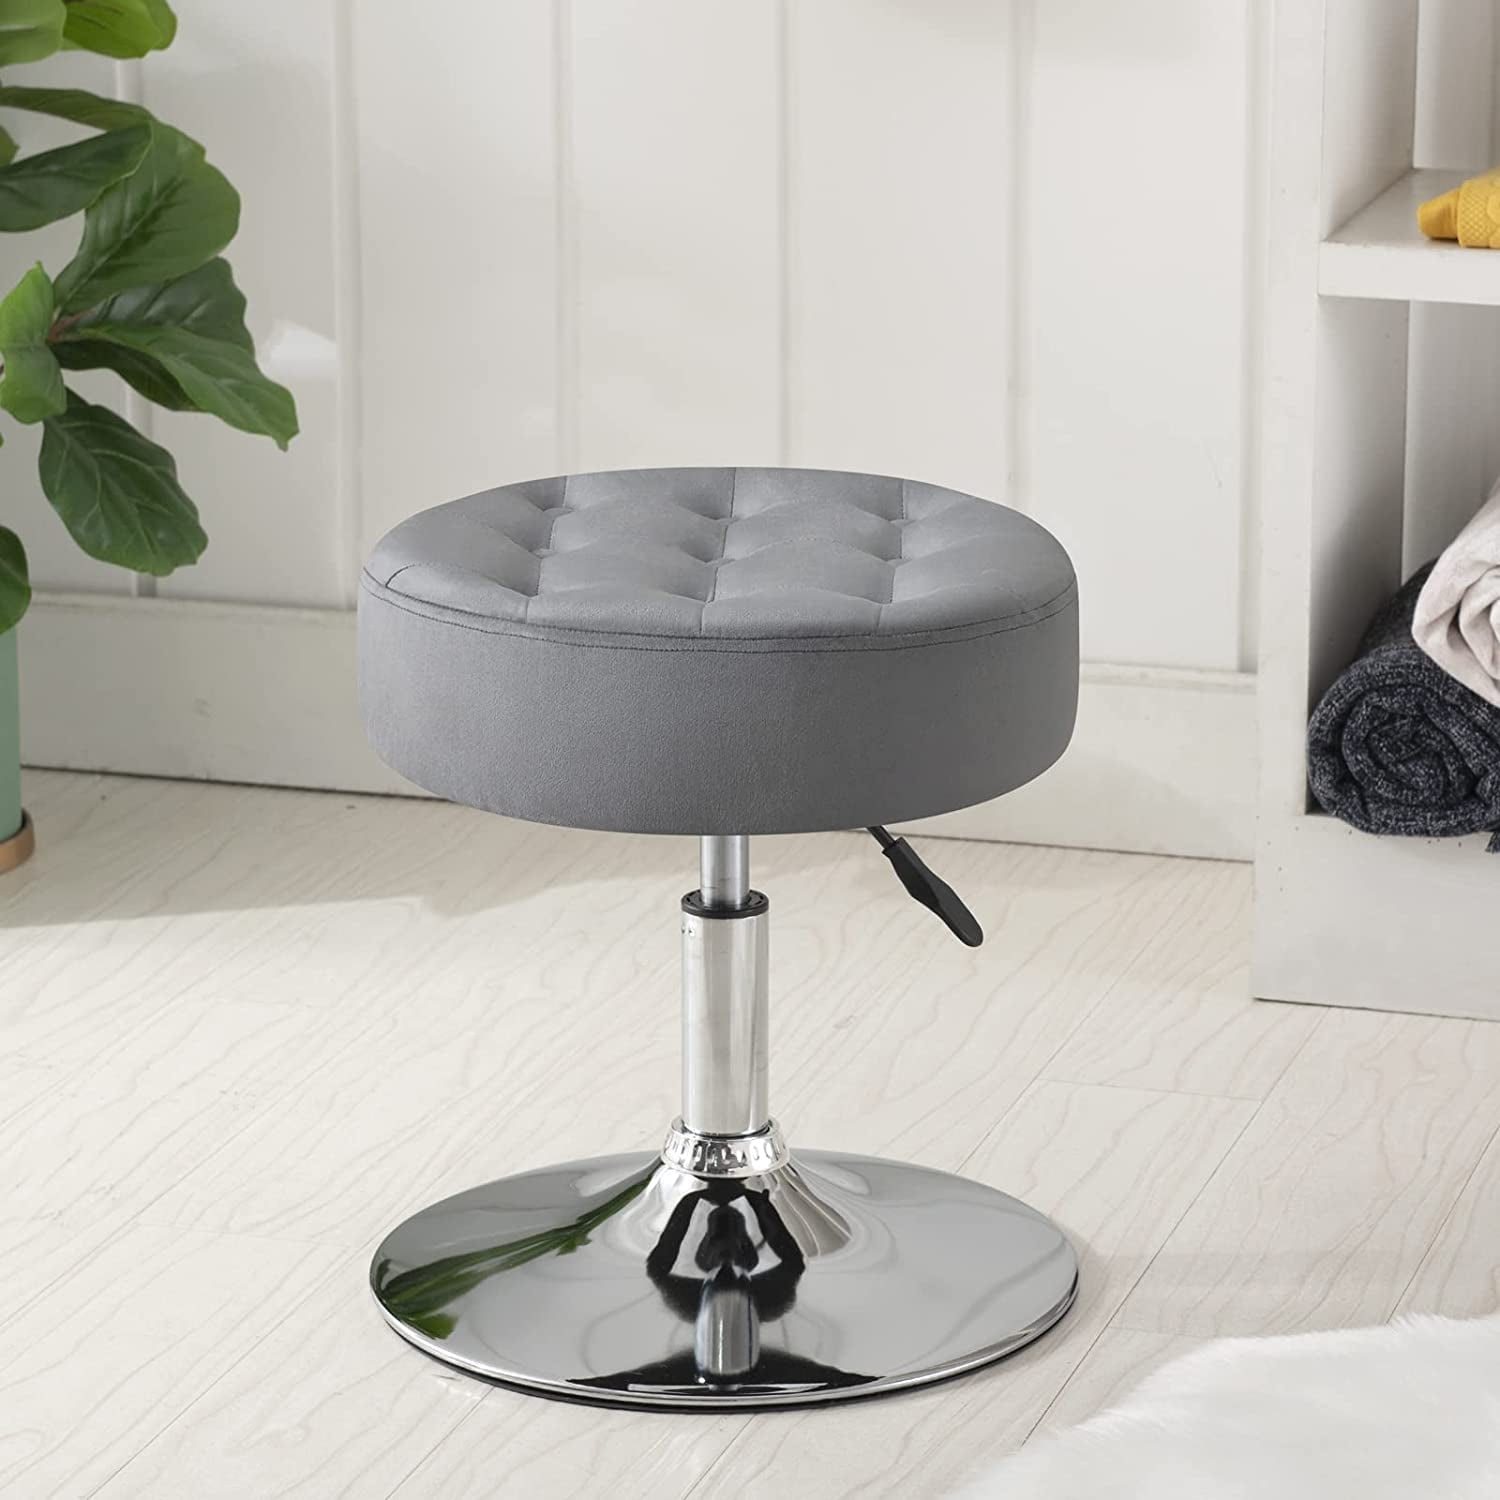 SONGMICS Vanity Stool Chair, Small Ottoman Stool with Storage, Vanity Chair,  12.2 Dia. x 16.9 Inches, 4 Metal Legs, for Makeup Room, for Living Room,  Bedroom, Dark Gray ULOM002G01, Welcome to consult 